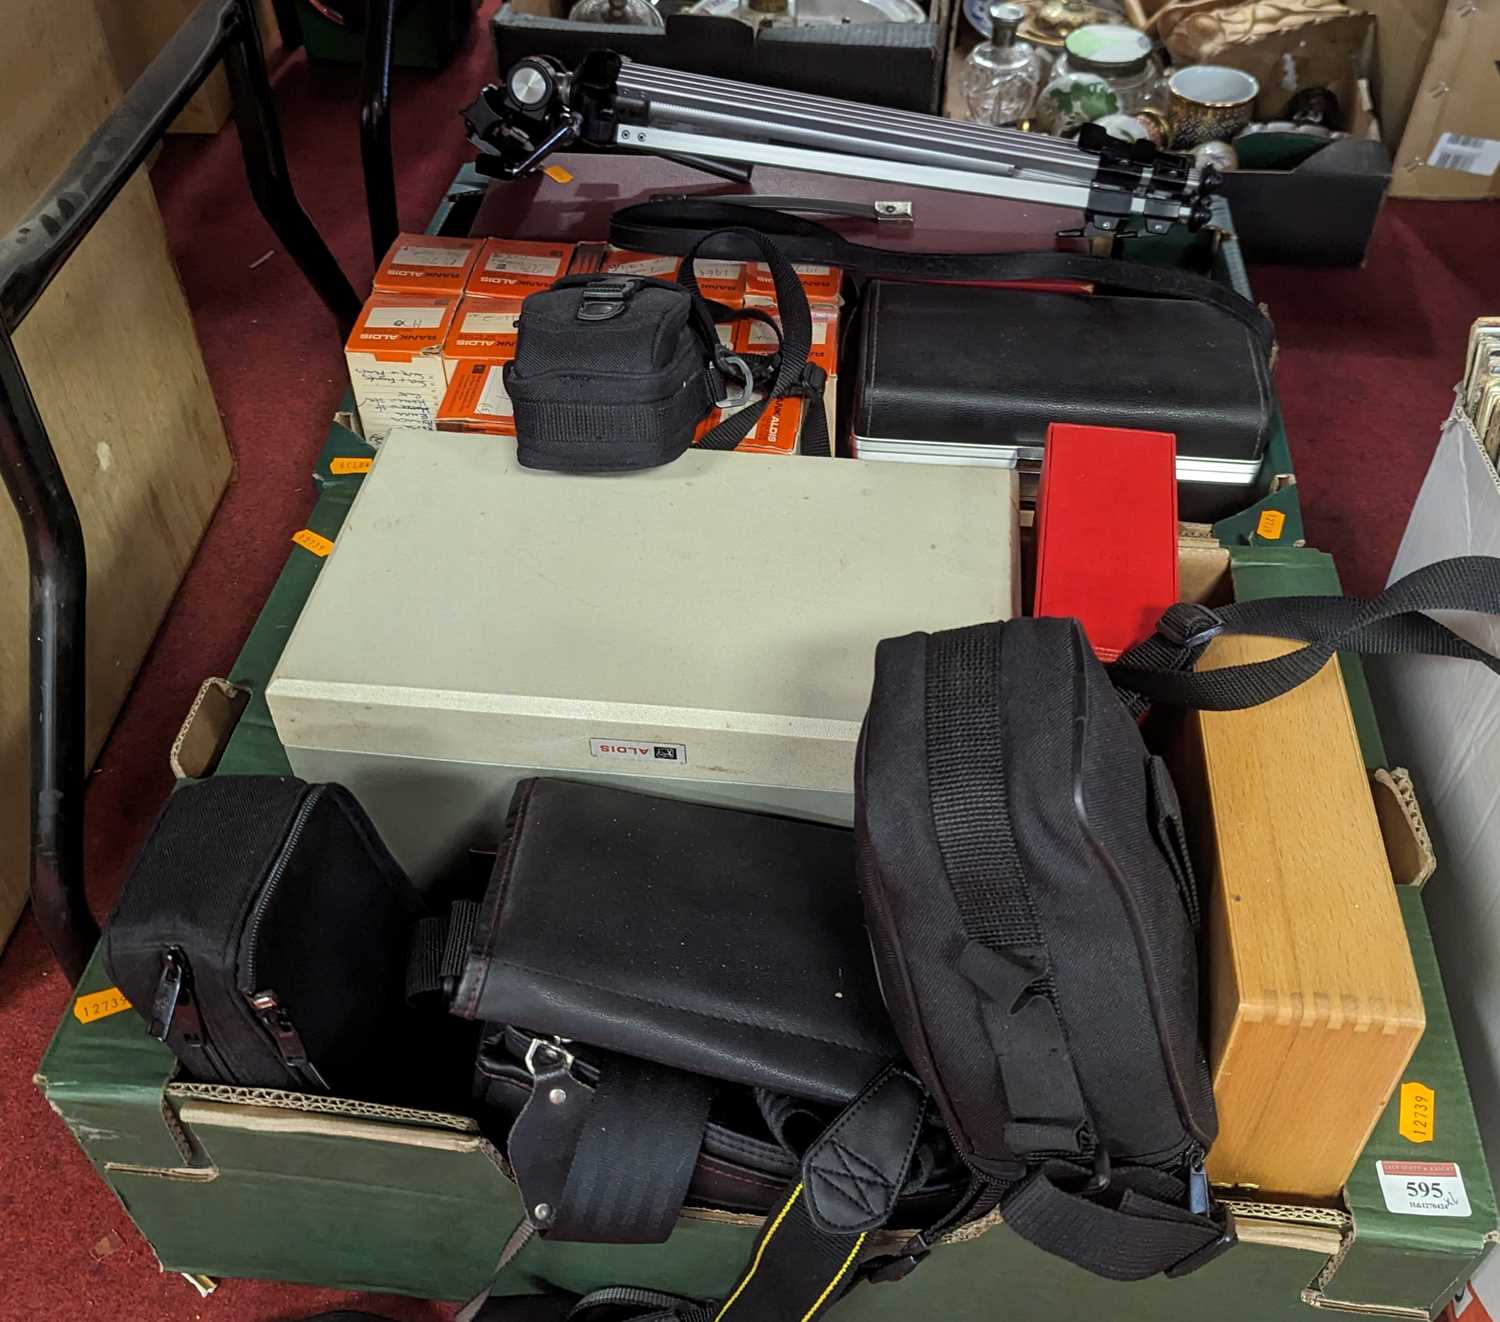 Two boxes of vintage photography equipment